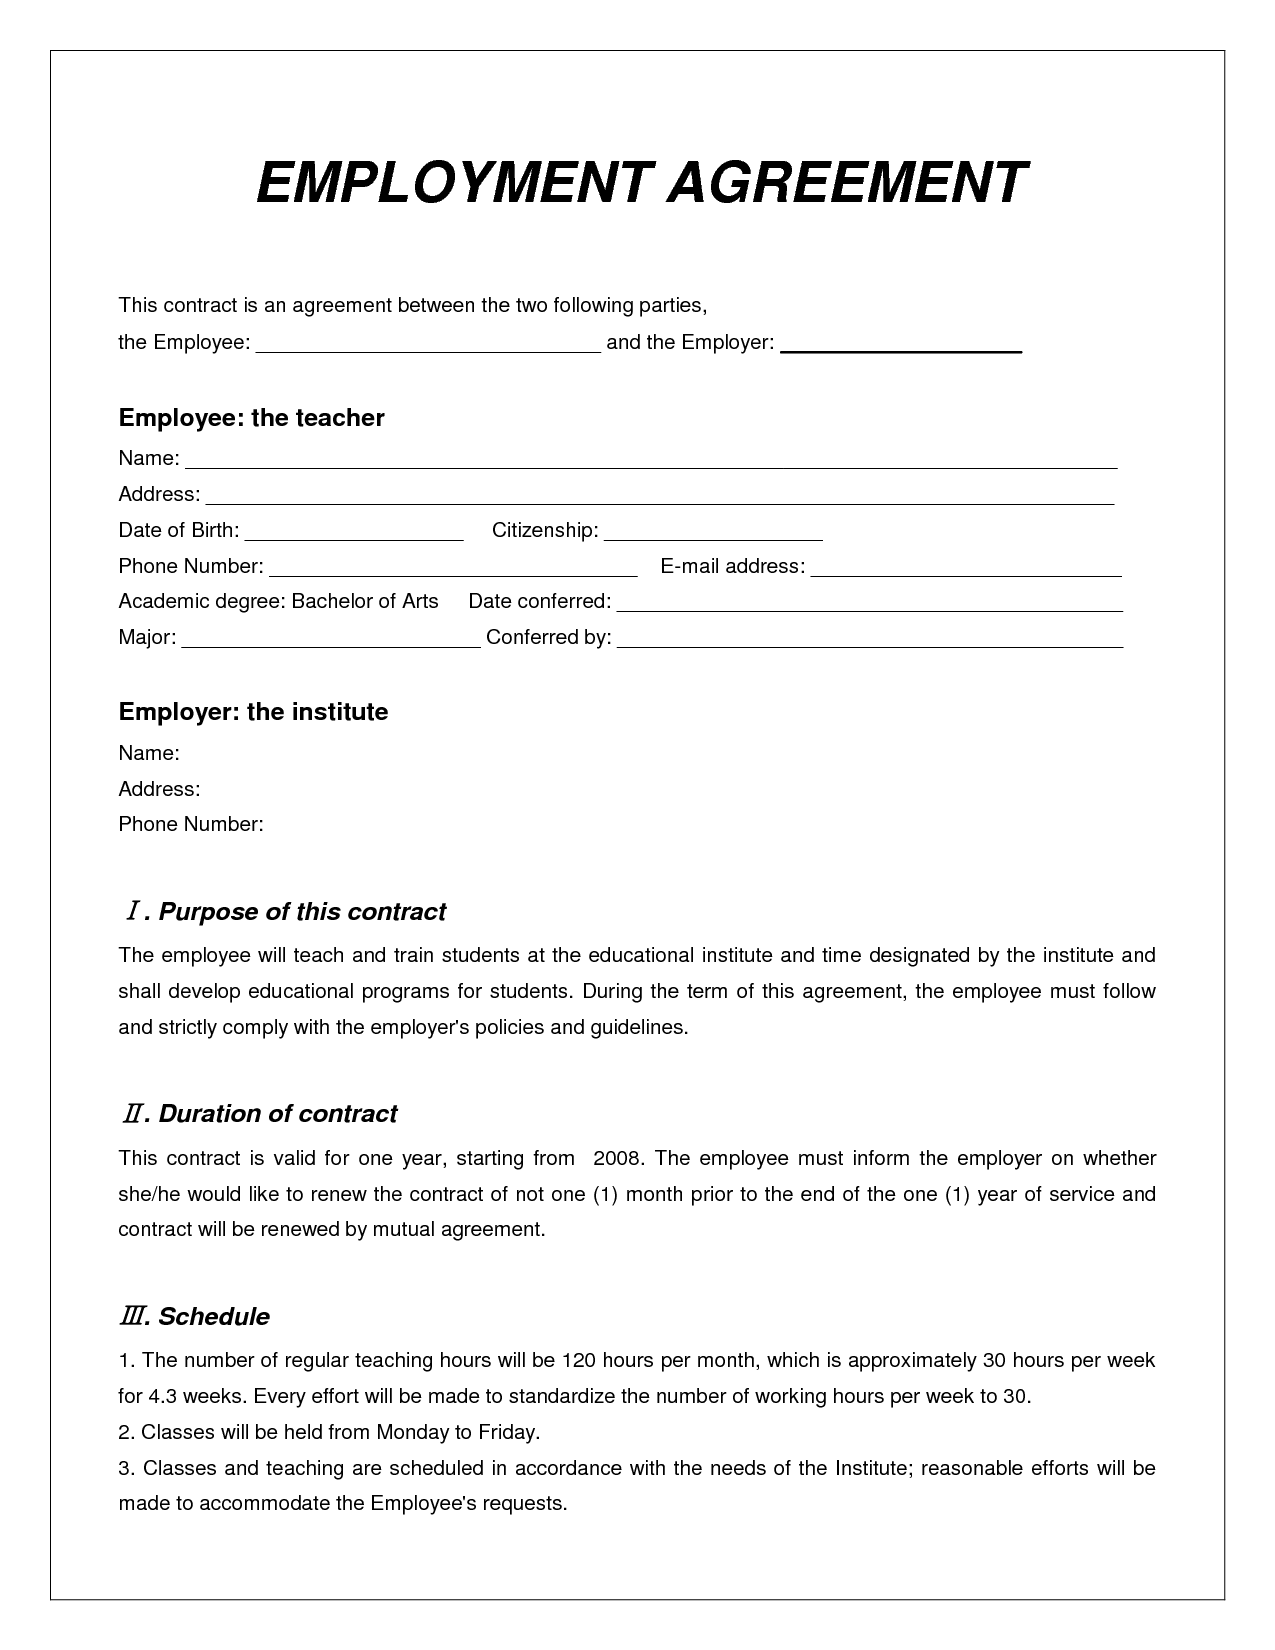 employment contract .rule of law.us